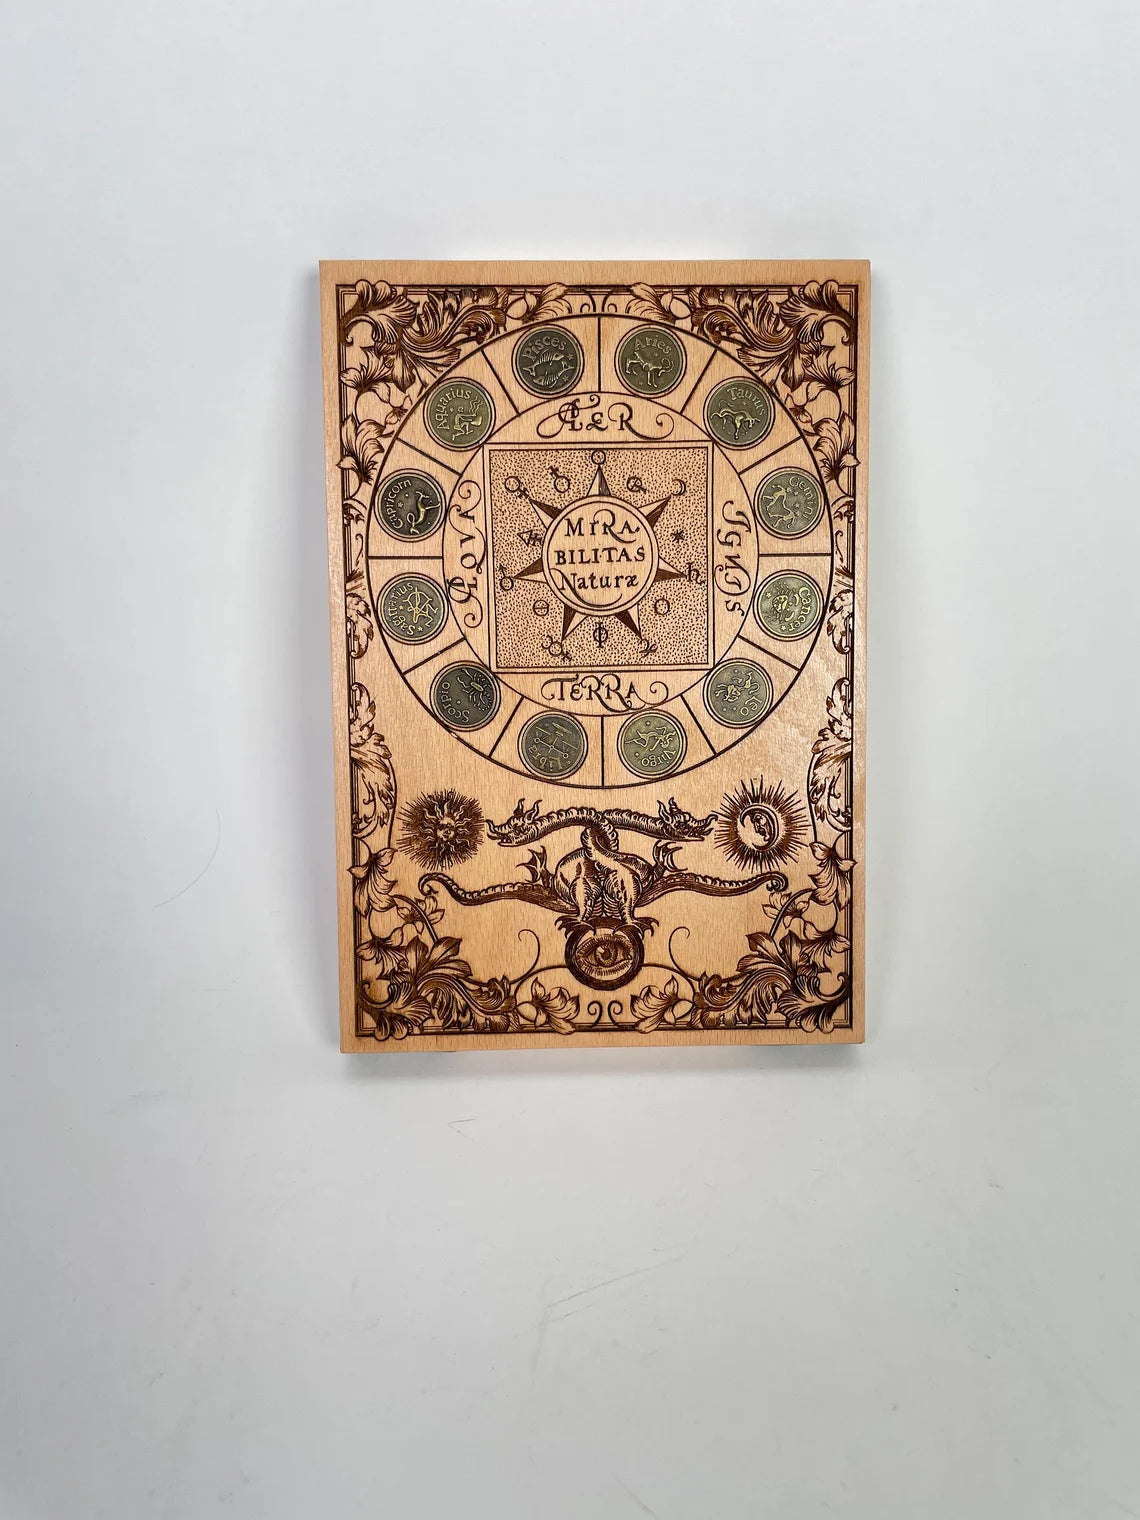 Alchemy symbols board laser engraved on wood, occult sign, Gothic alchemical Kabbalistic symbols, magics art, 8.6 inch, Kabbalah art.